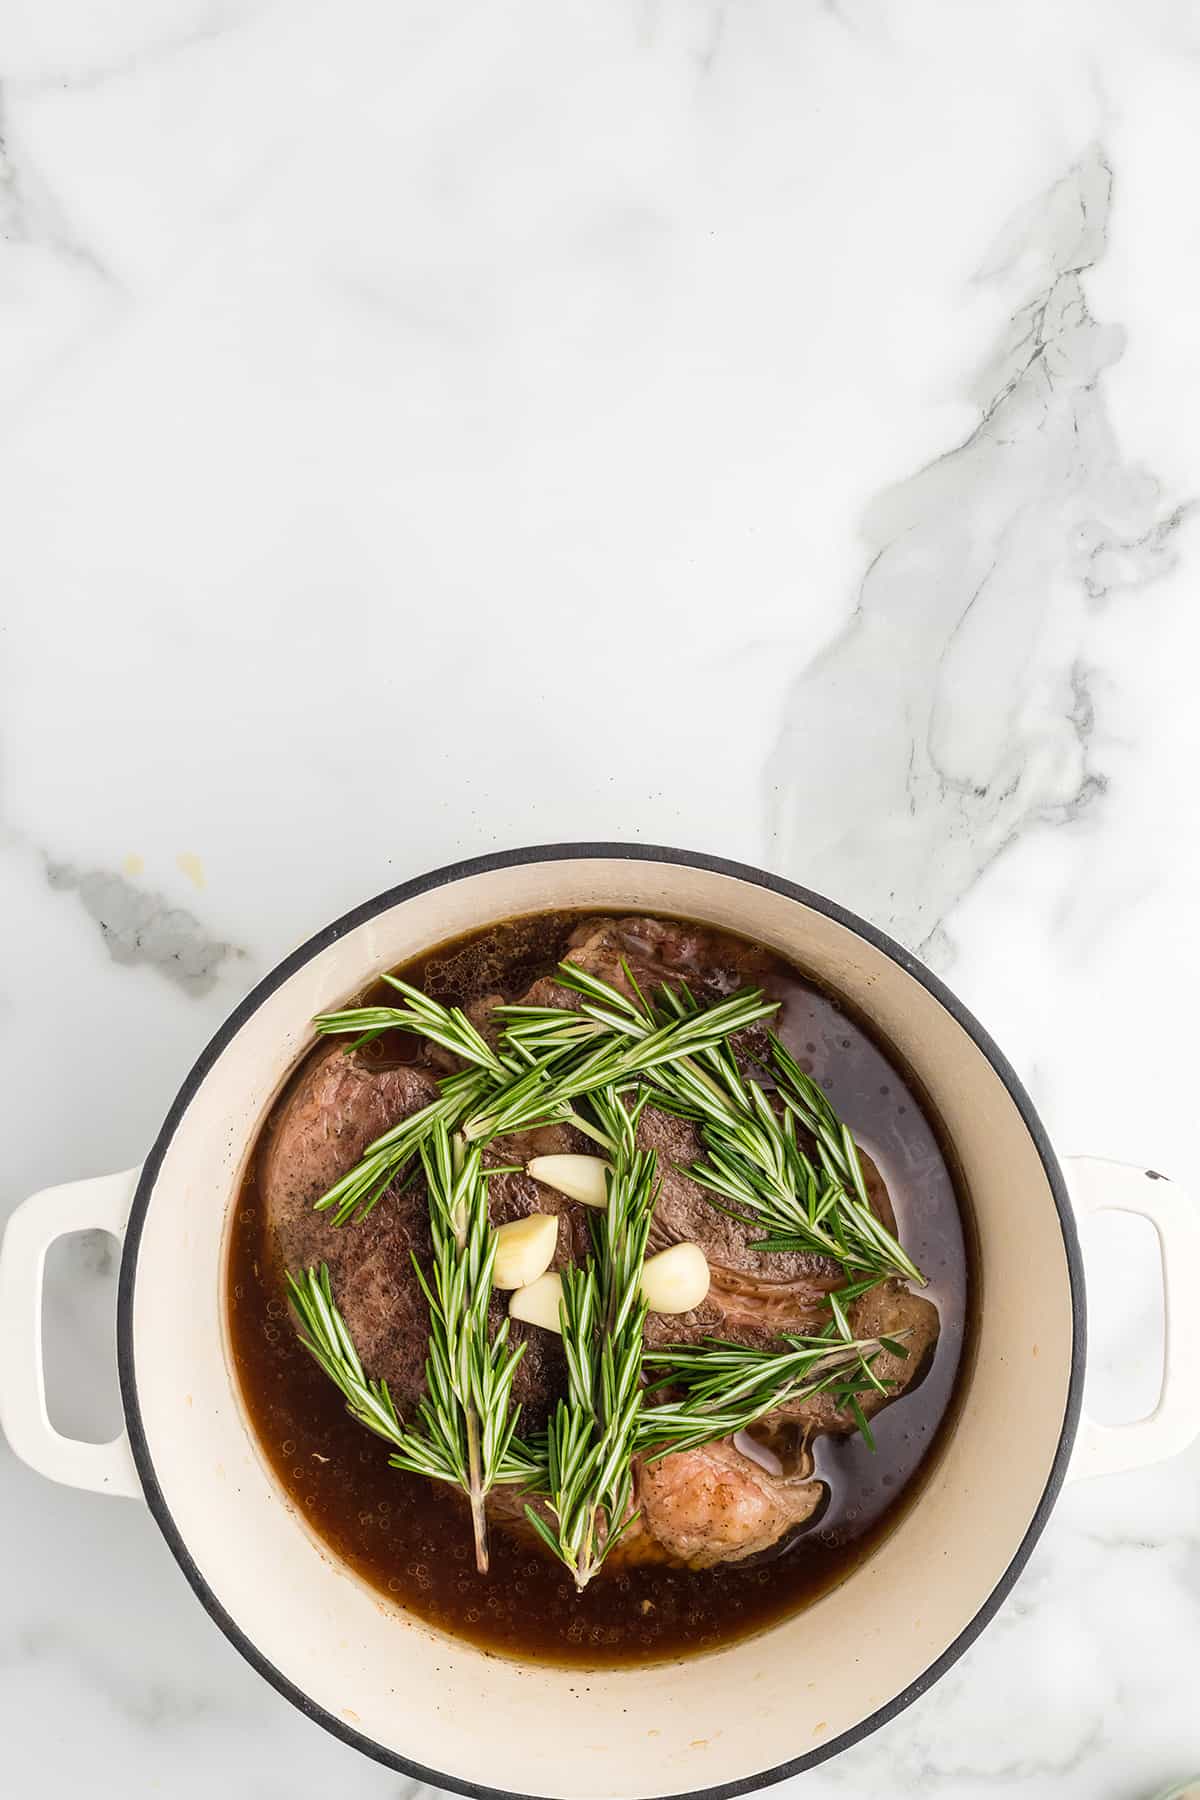 Beef broth, garlic, and rosemary added to the pot.